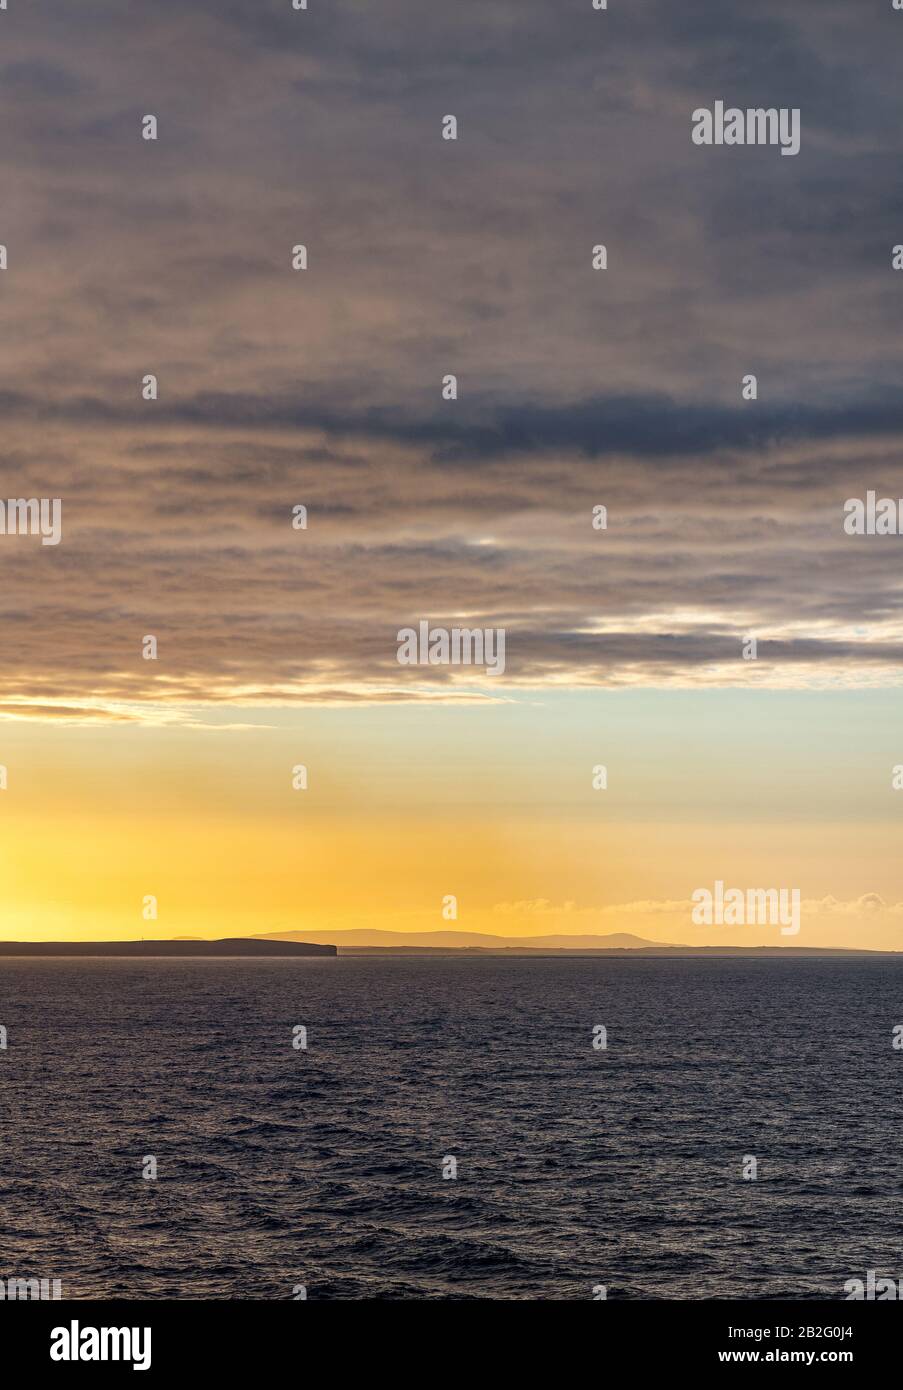 Scoland, Orkney seascape at sunset Stock Photo